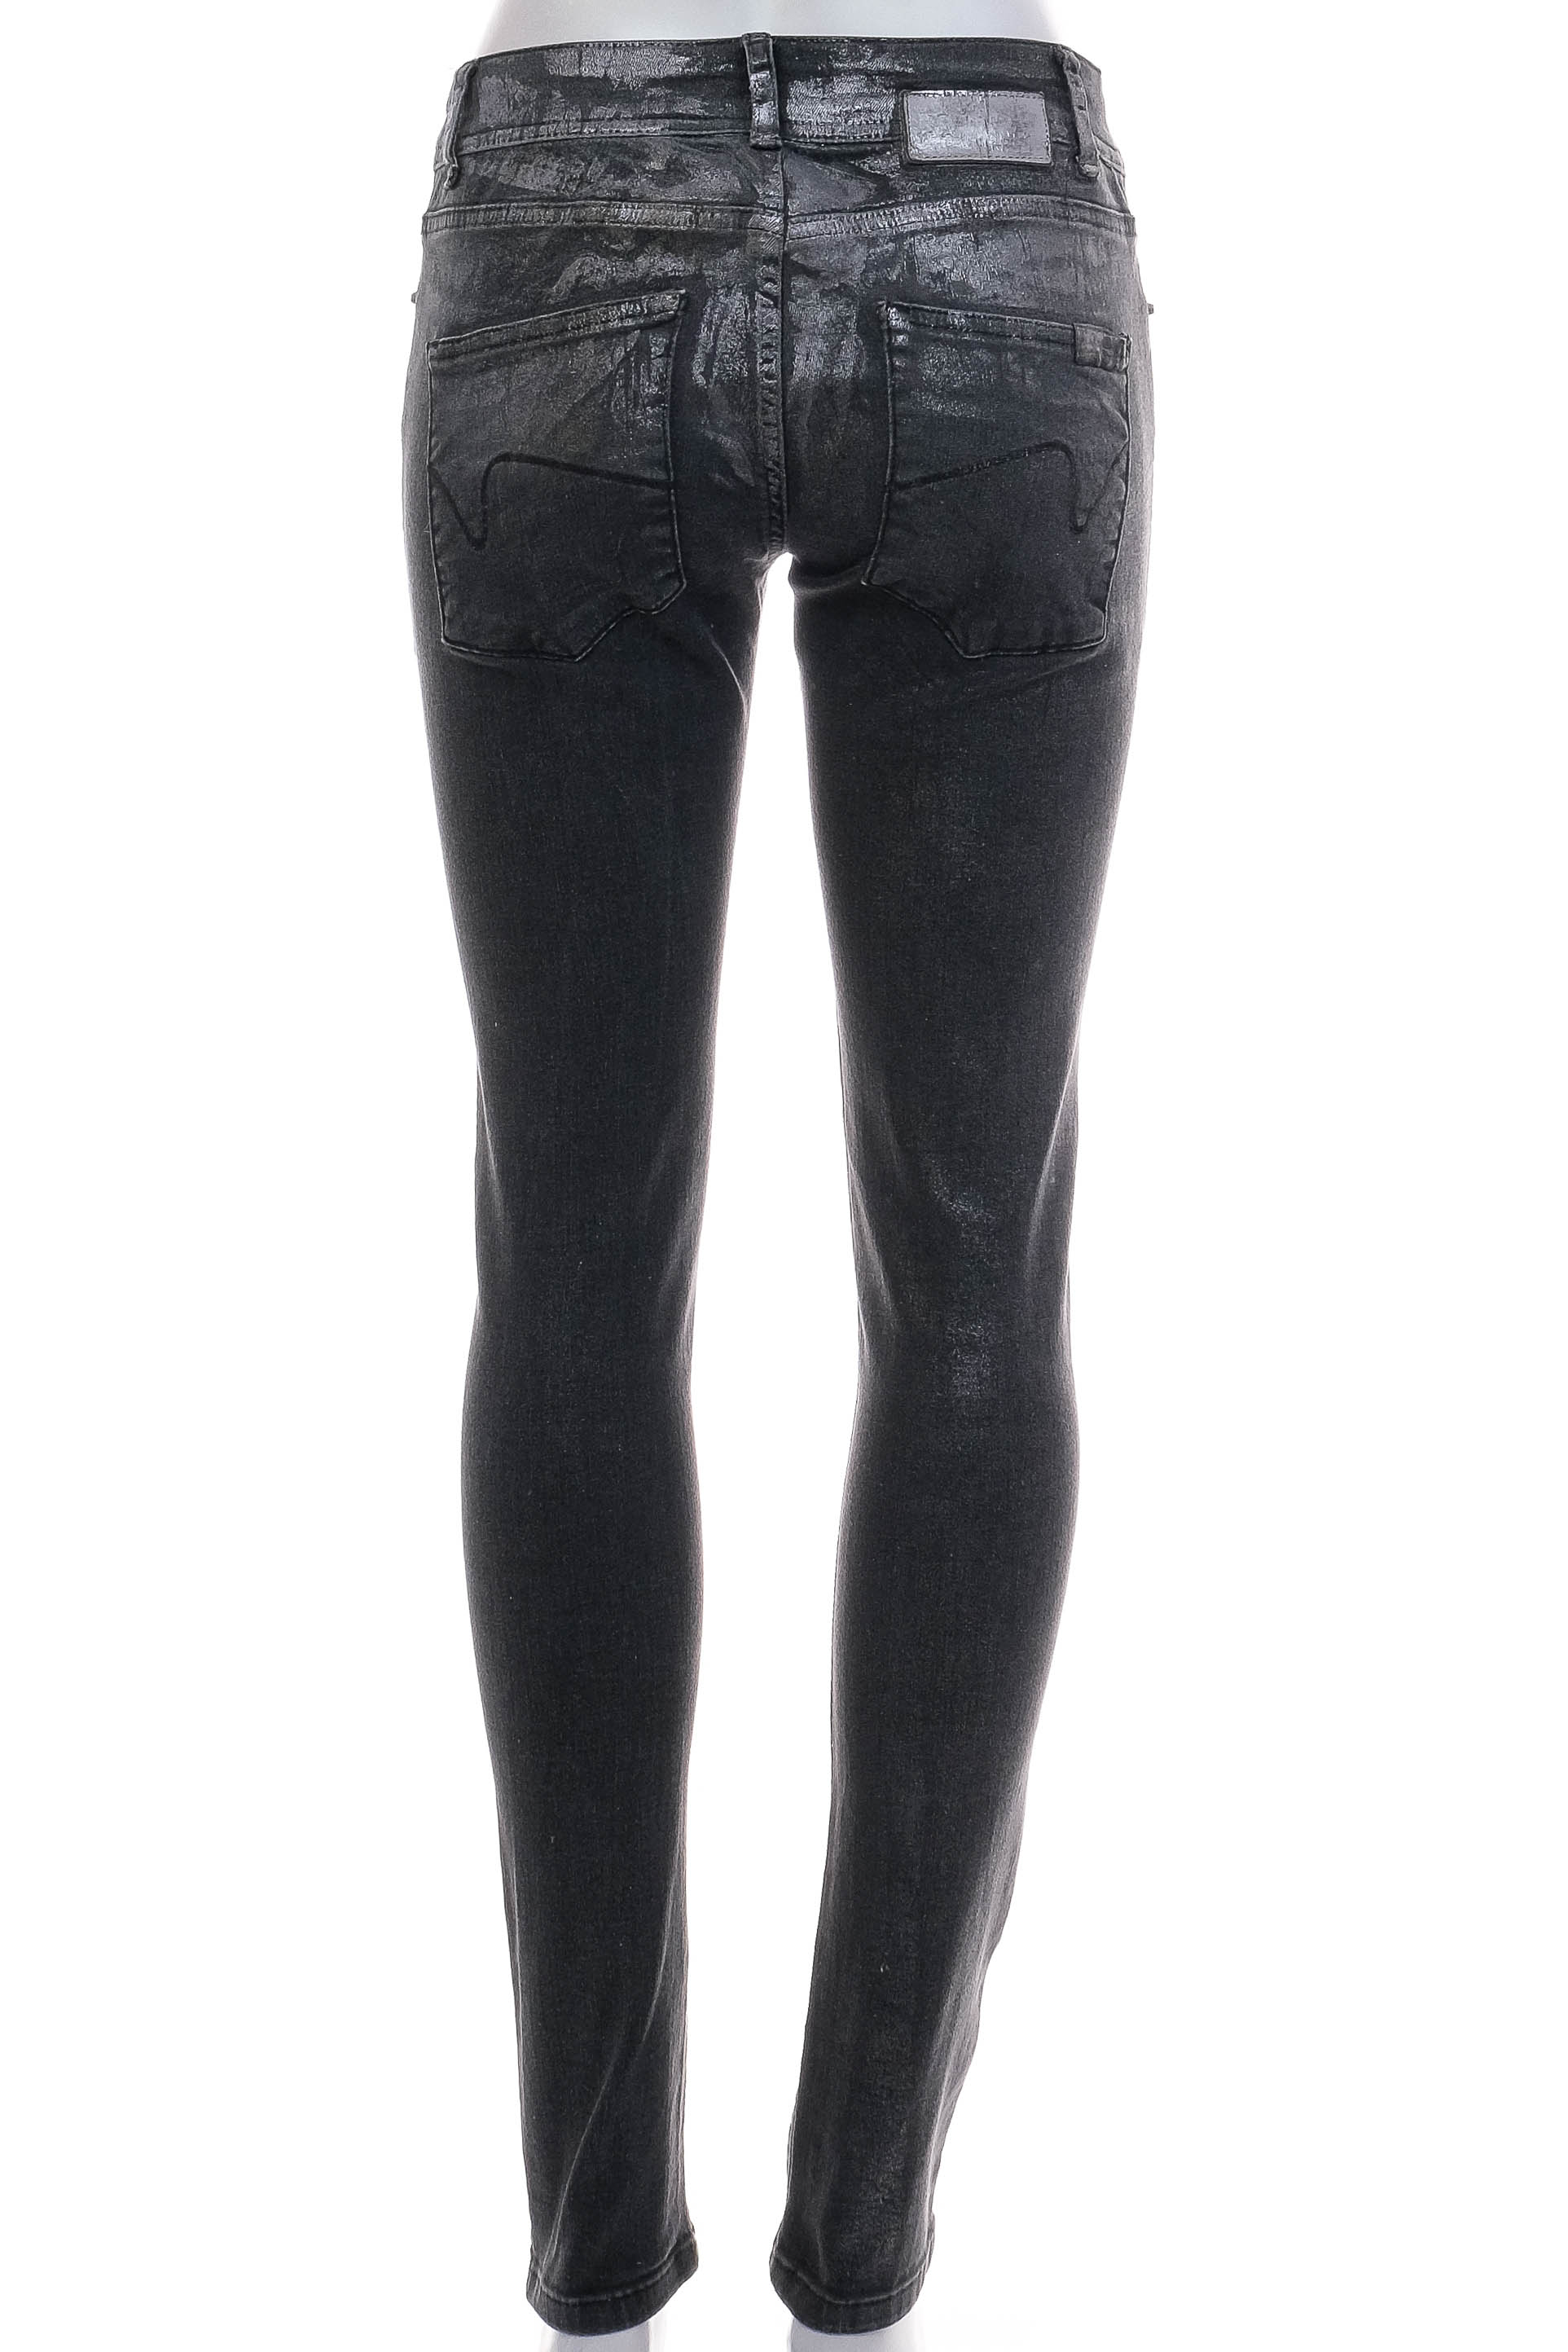 Women's jeans - Circle of trust - 1